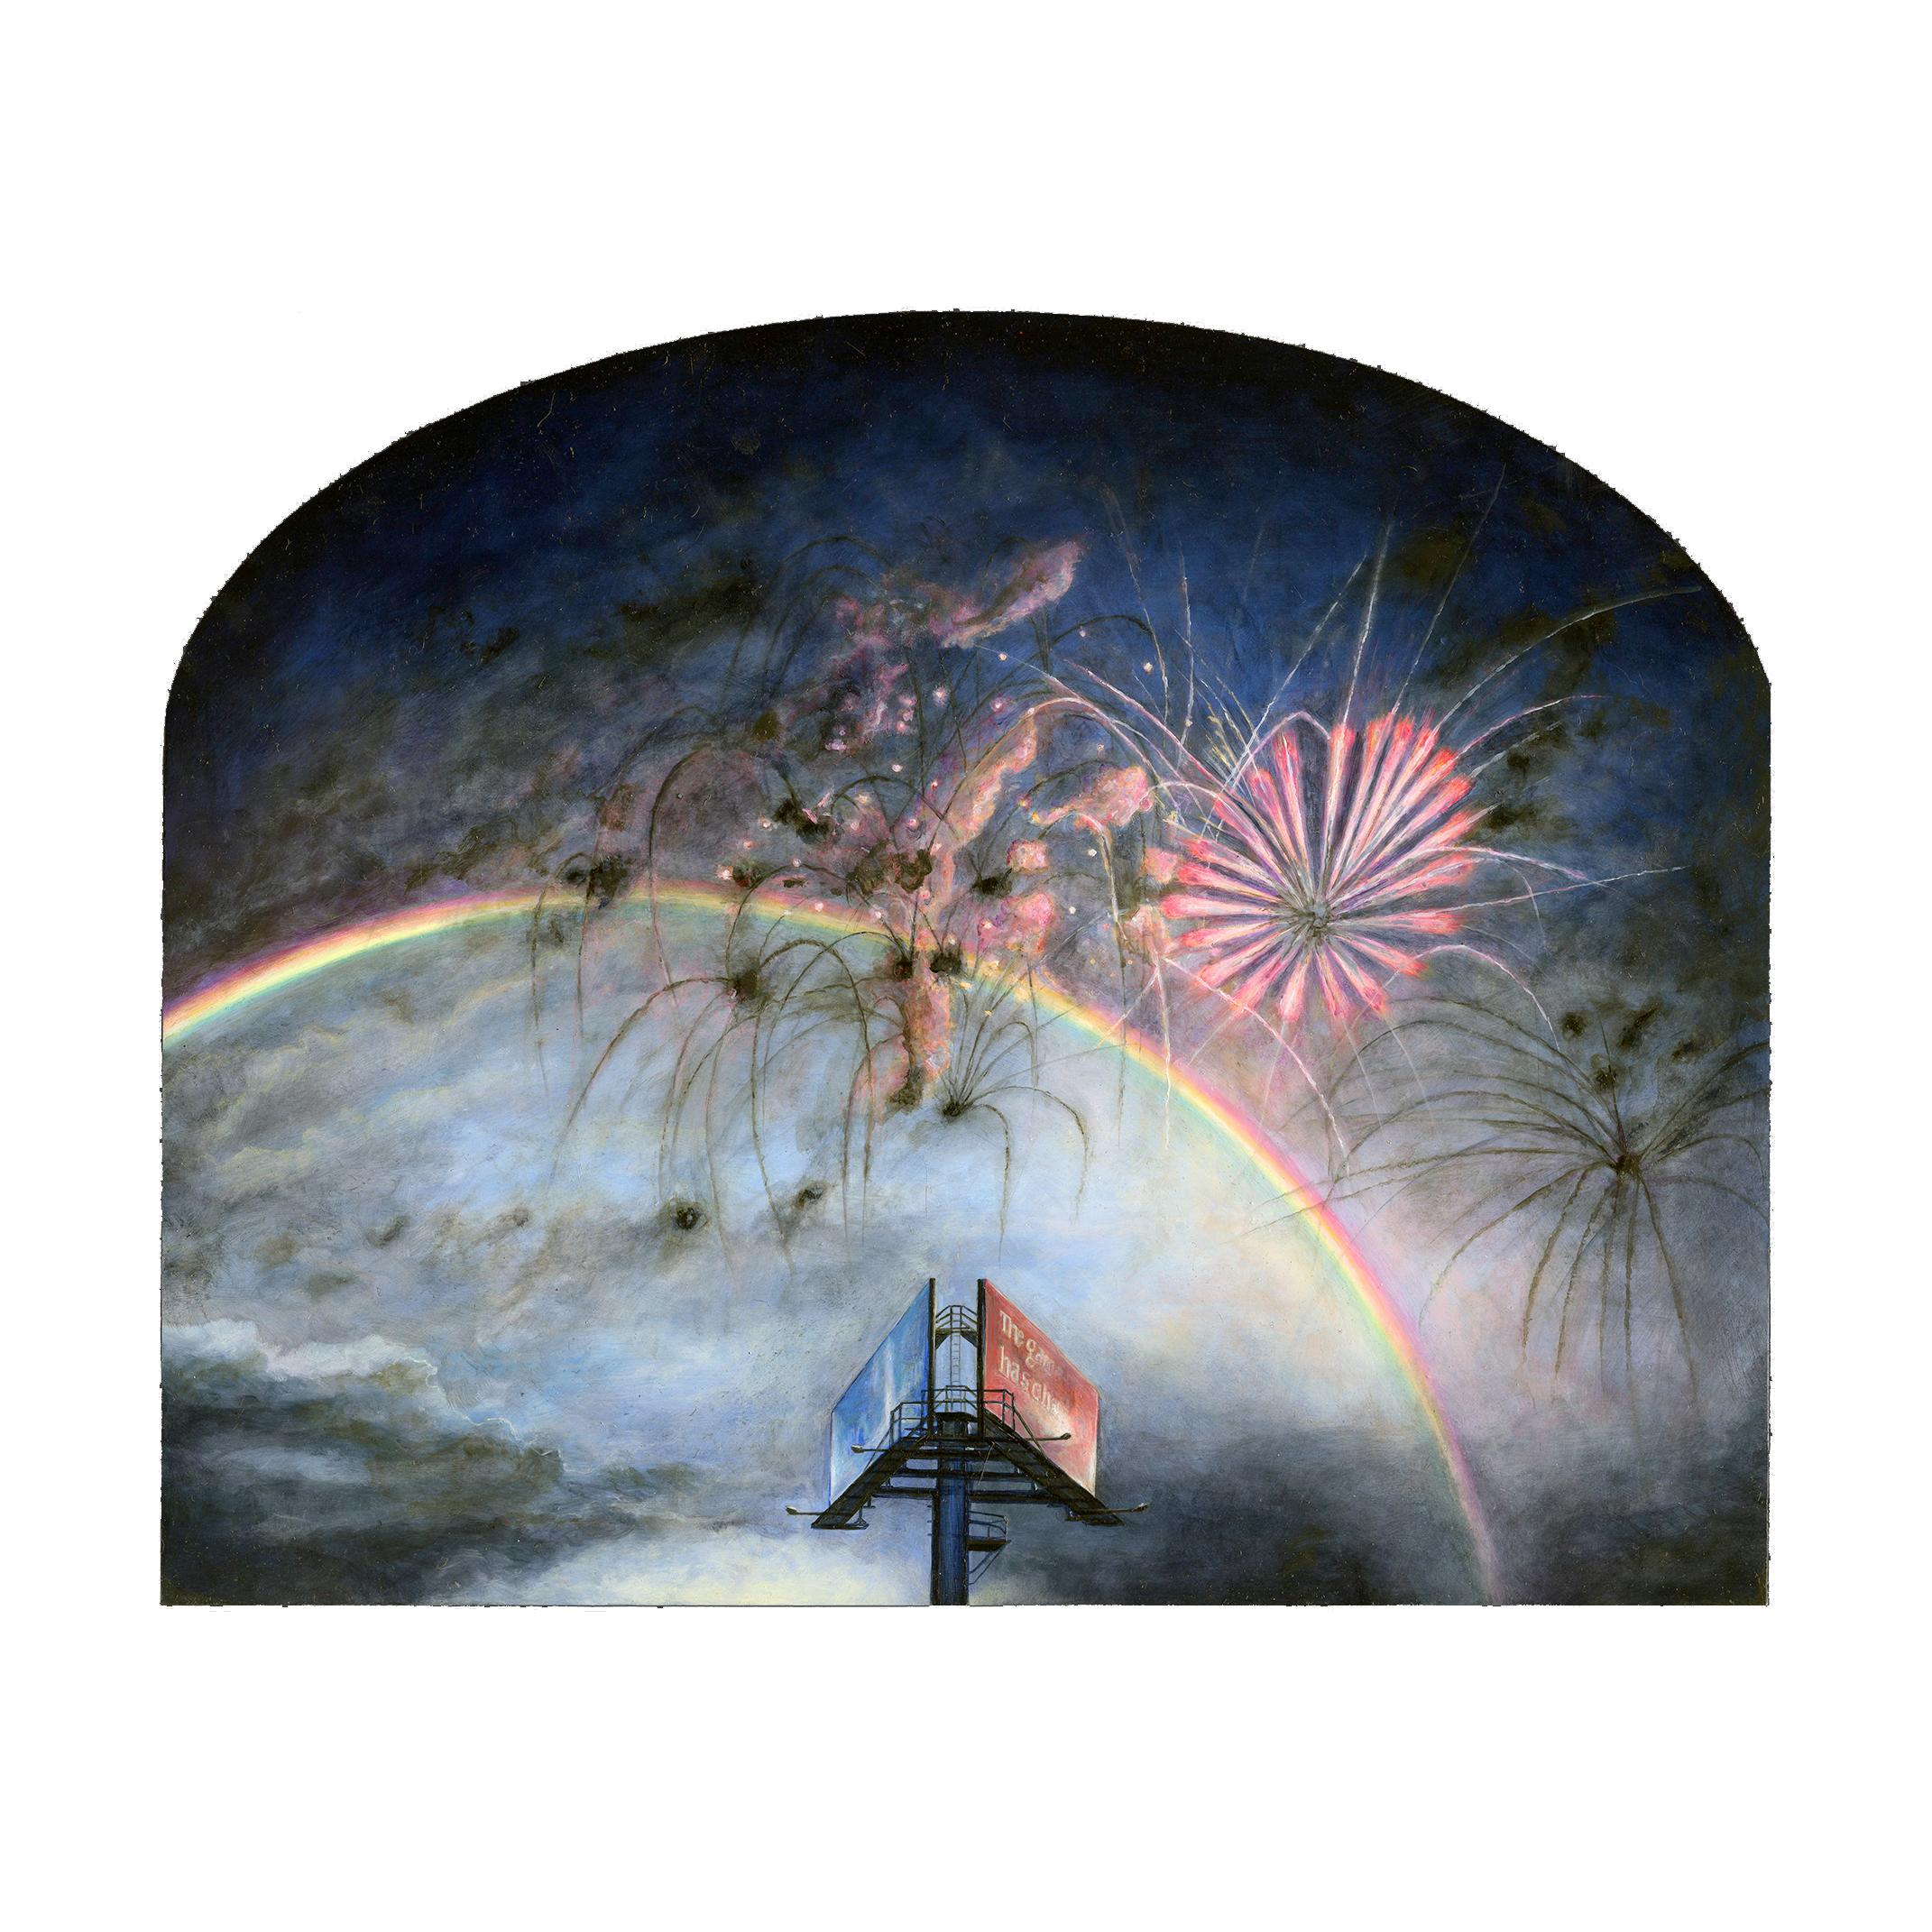 Mark Bowers Landscape Painting - True North - Orientation, Surreal Sky with Billboard, Rainbow and Fireworks